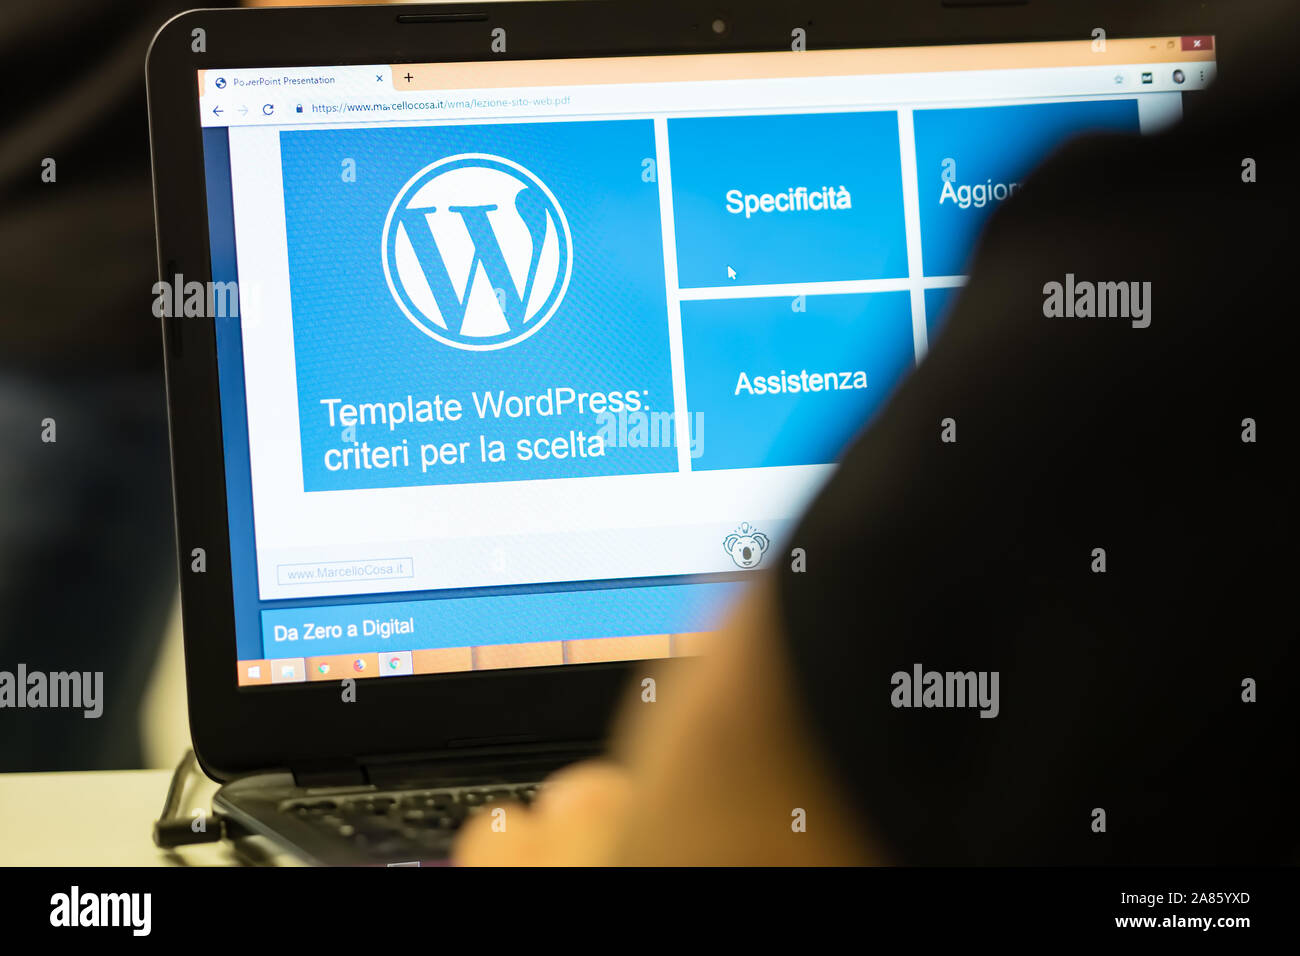 A laptop screen photographed with the Wordpress logo, partially visible from the operator's shoulders. Stock Photo